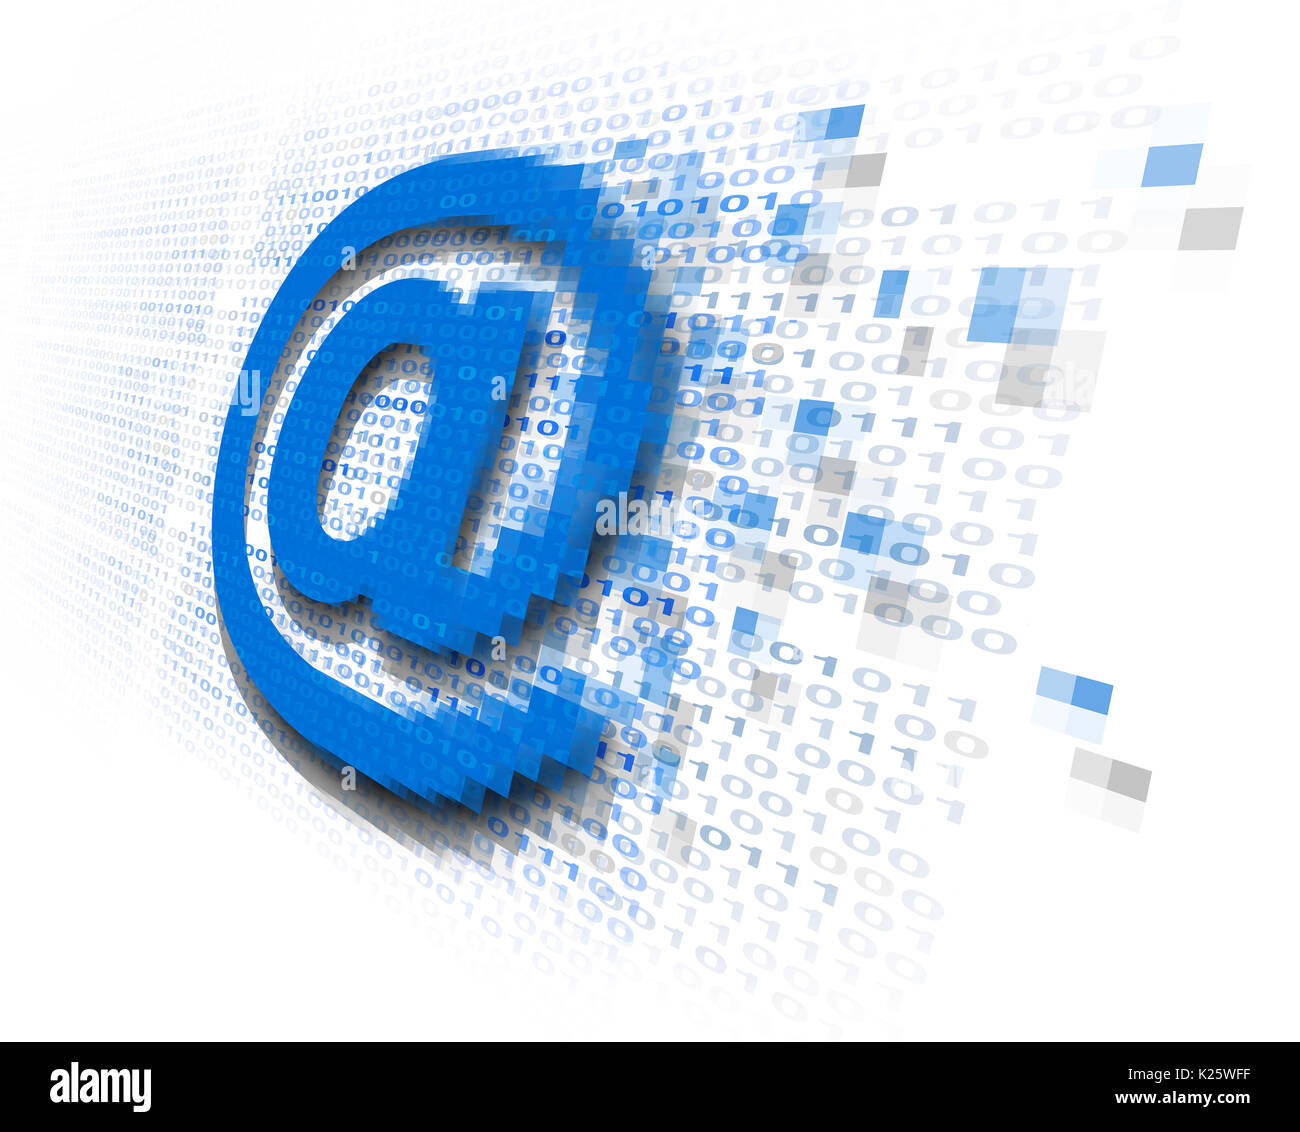 Internet email security technology concept as an at sign icon being encrypted for data transfer protection with binary code background. Stock Photo